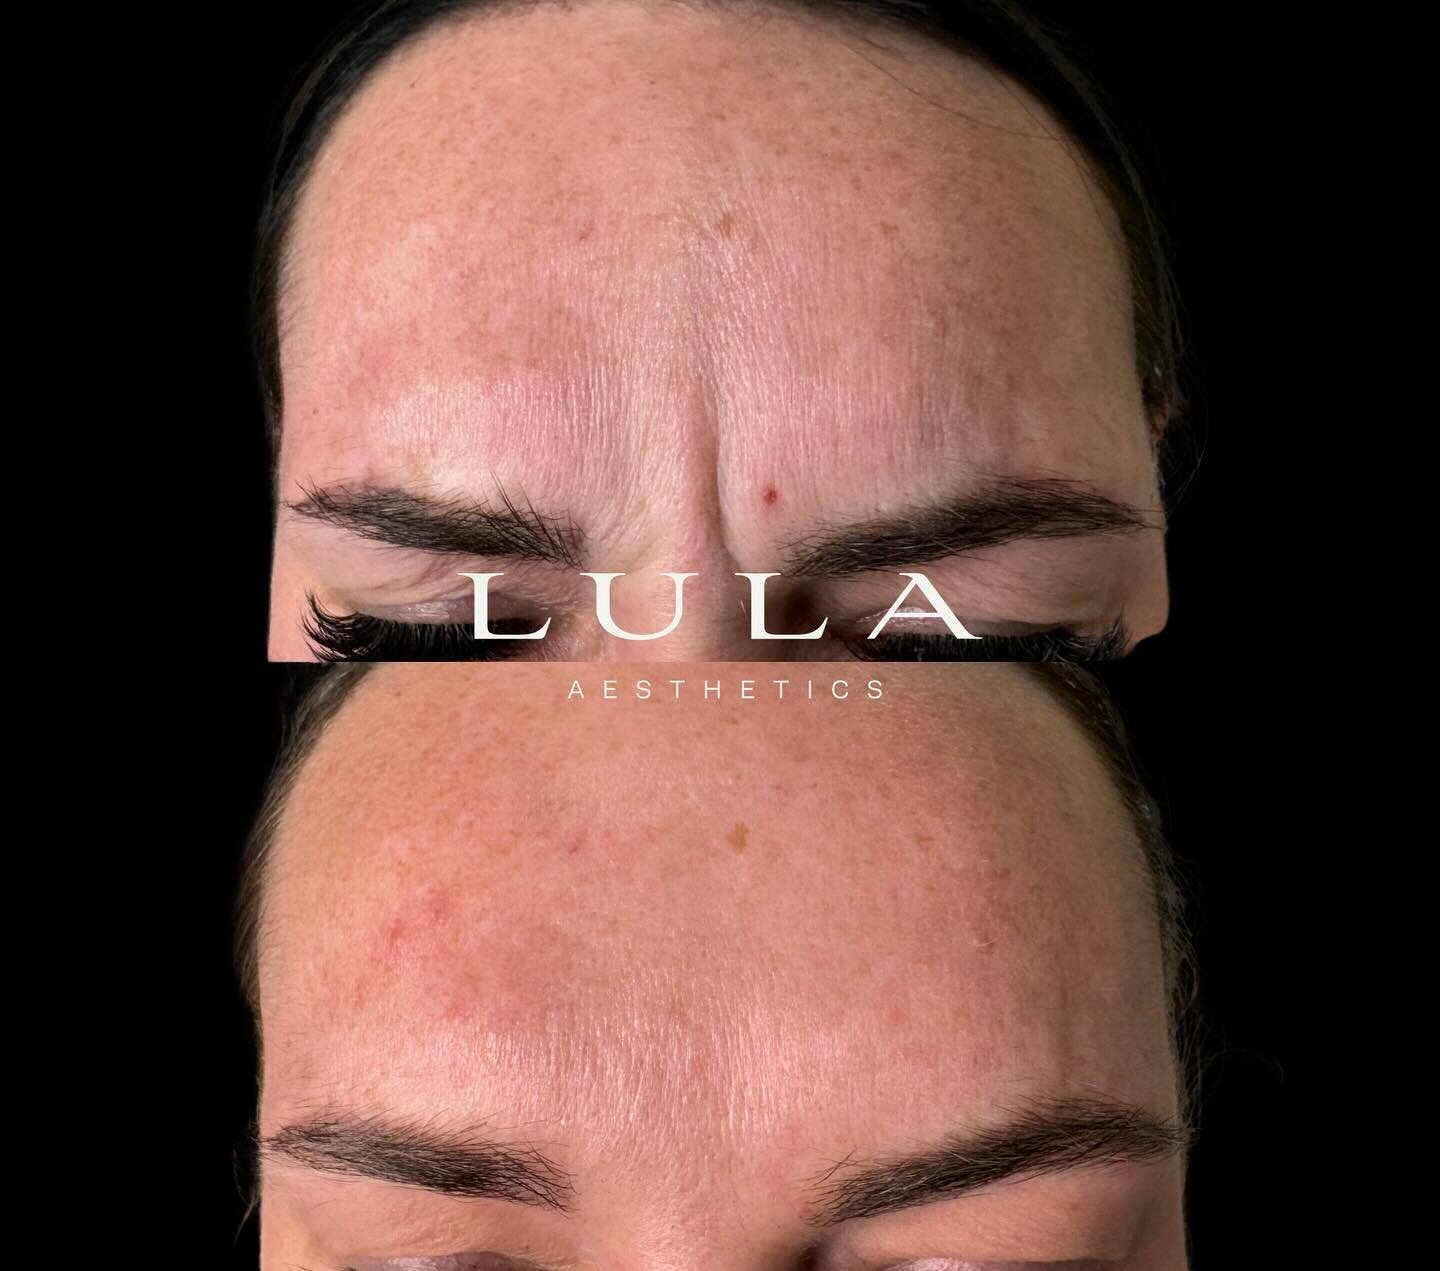 LULA AESTHETICS offers complementary consultations to discuss various anti-aging &amp; beauty concerns. 

RN Madi provides reassurance, knowledge &amp; honesty when it comes towards the medical procedures offered in clinic. 

It is necessary to speak